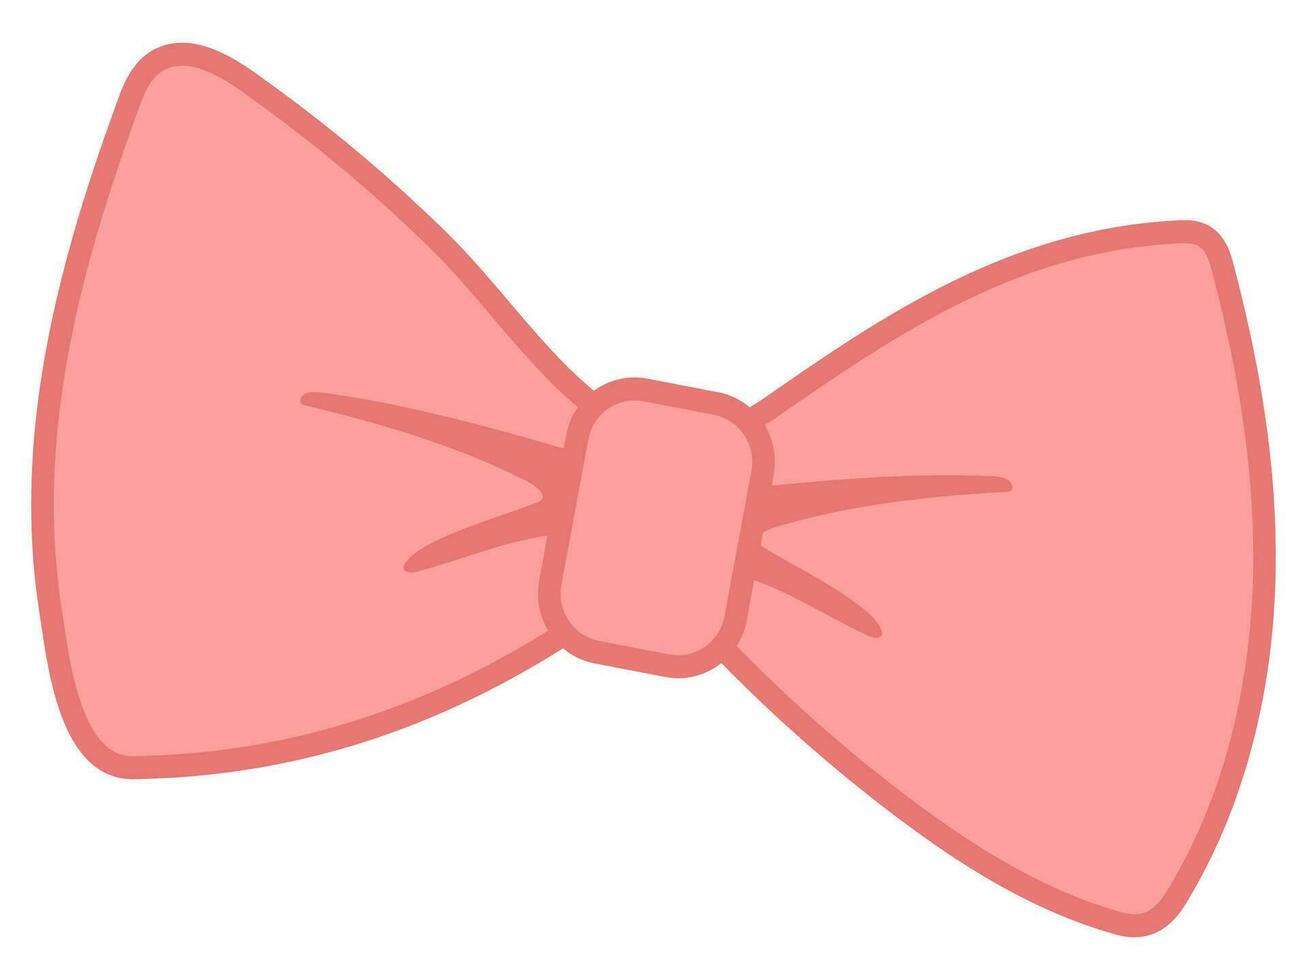 Pink bow tie vector isolated illustration.